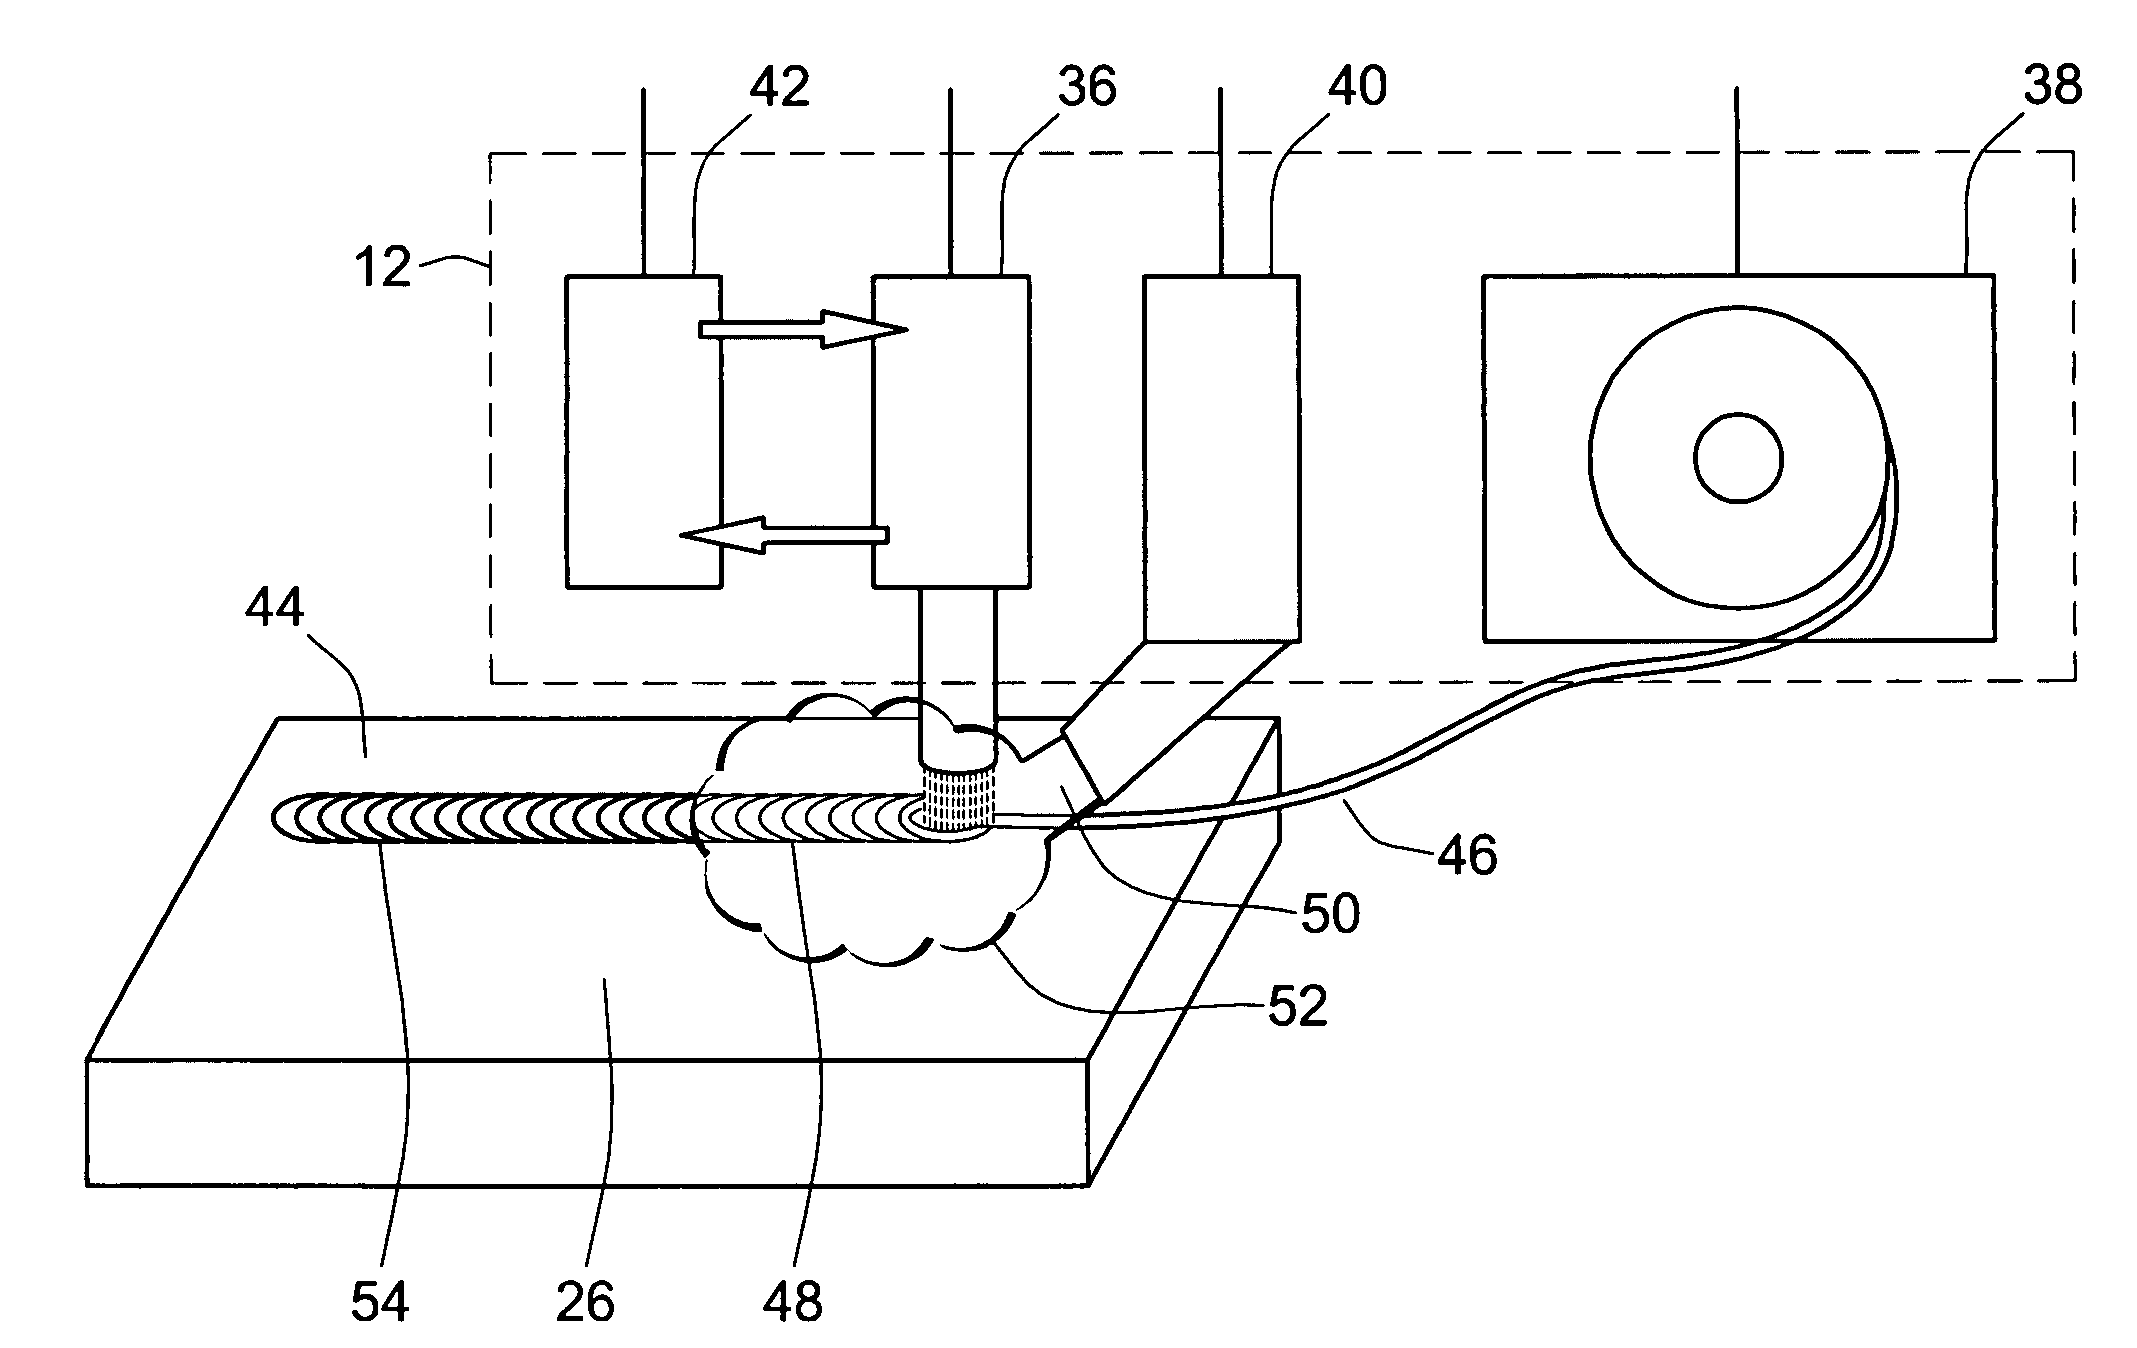 Method and apparatus for repairing or building up surfaces on a workpiece while the workpiece is mounted on a machine tool